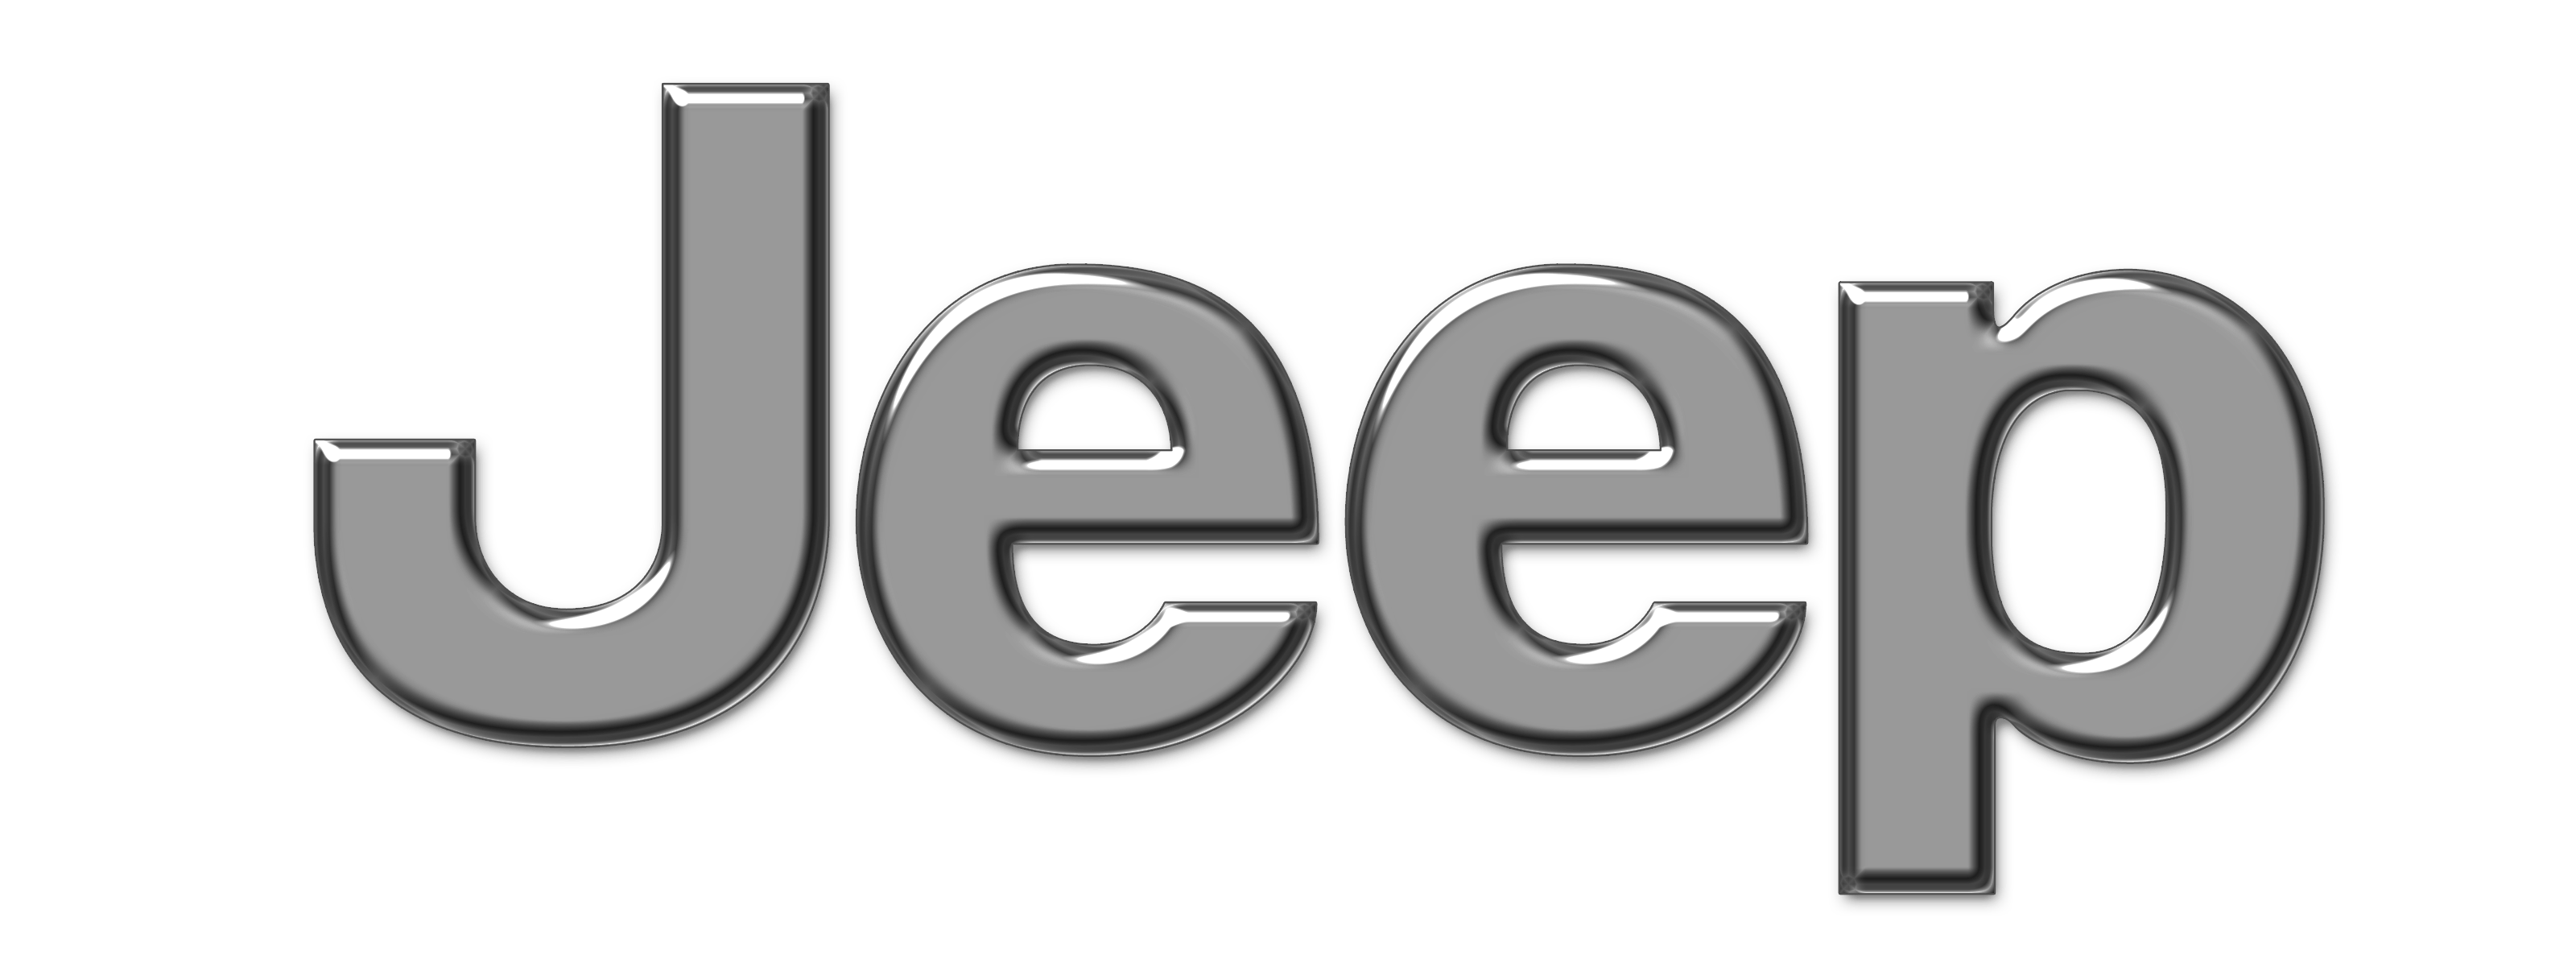 White Jeep Logo - Jeep Logo Meaning and History, latest models | World Cars Brands